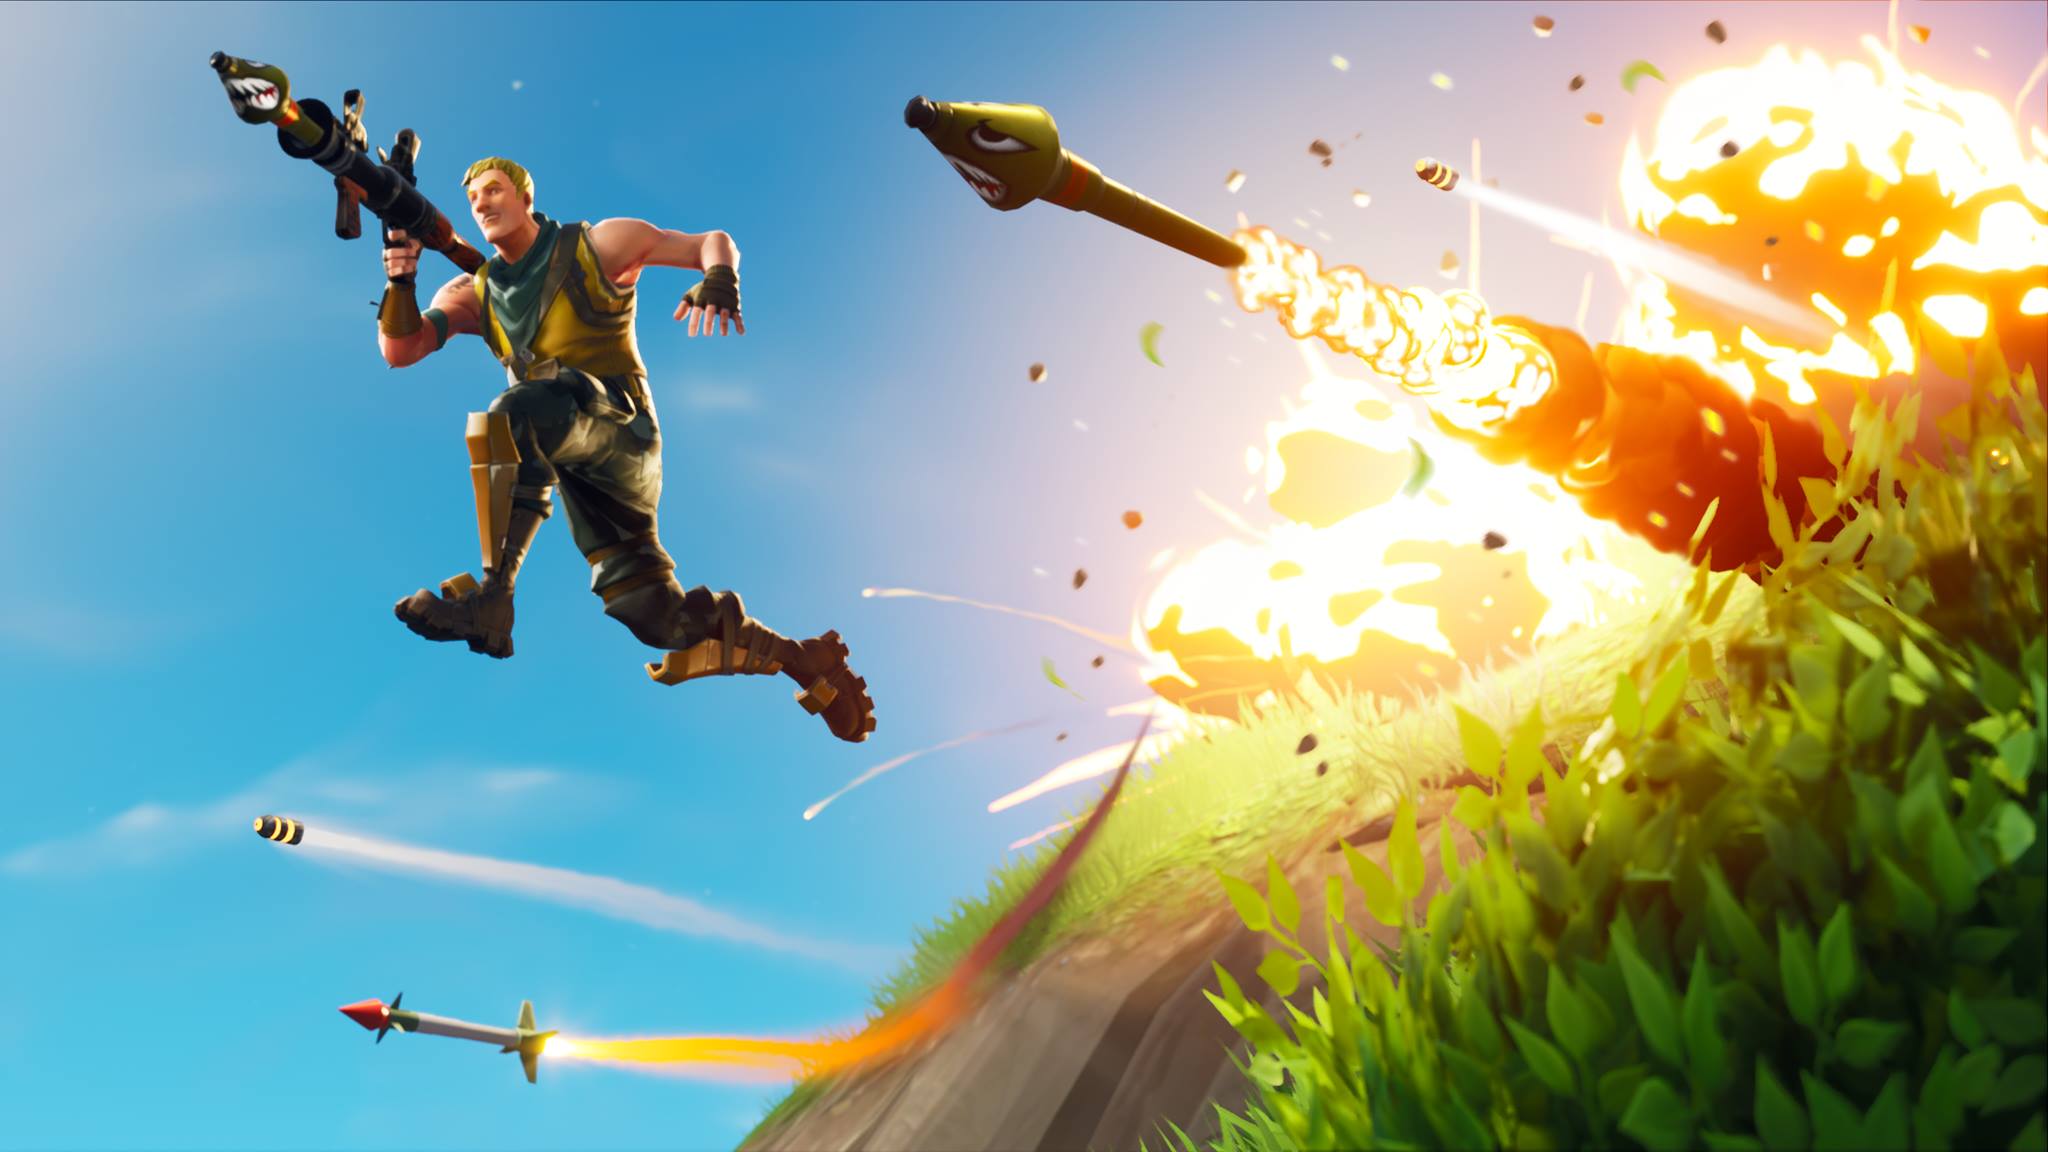 Epic Games Reportedly Made 3bn In Profit Thanks To Fortnite